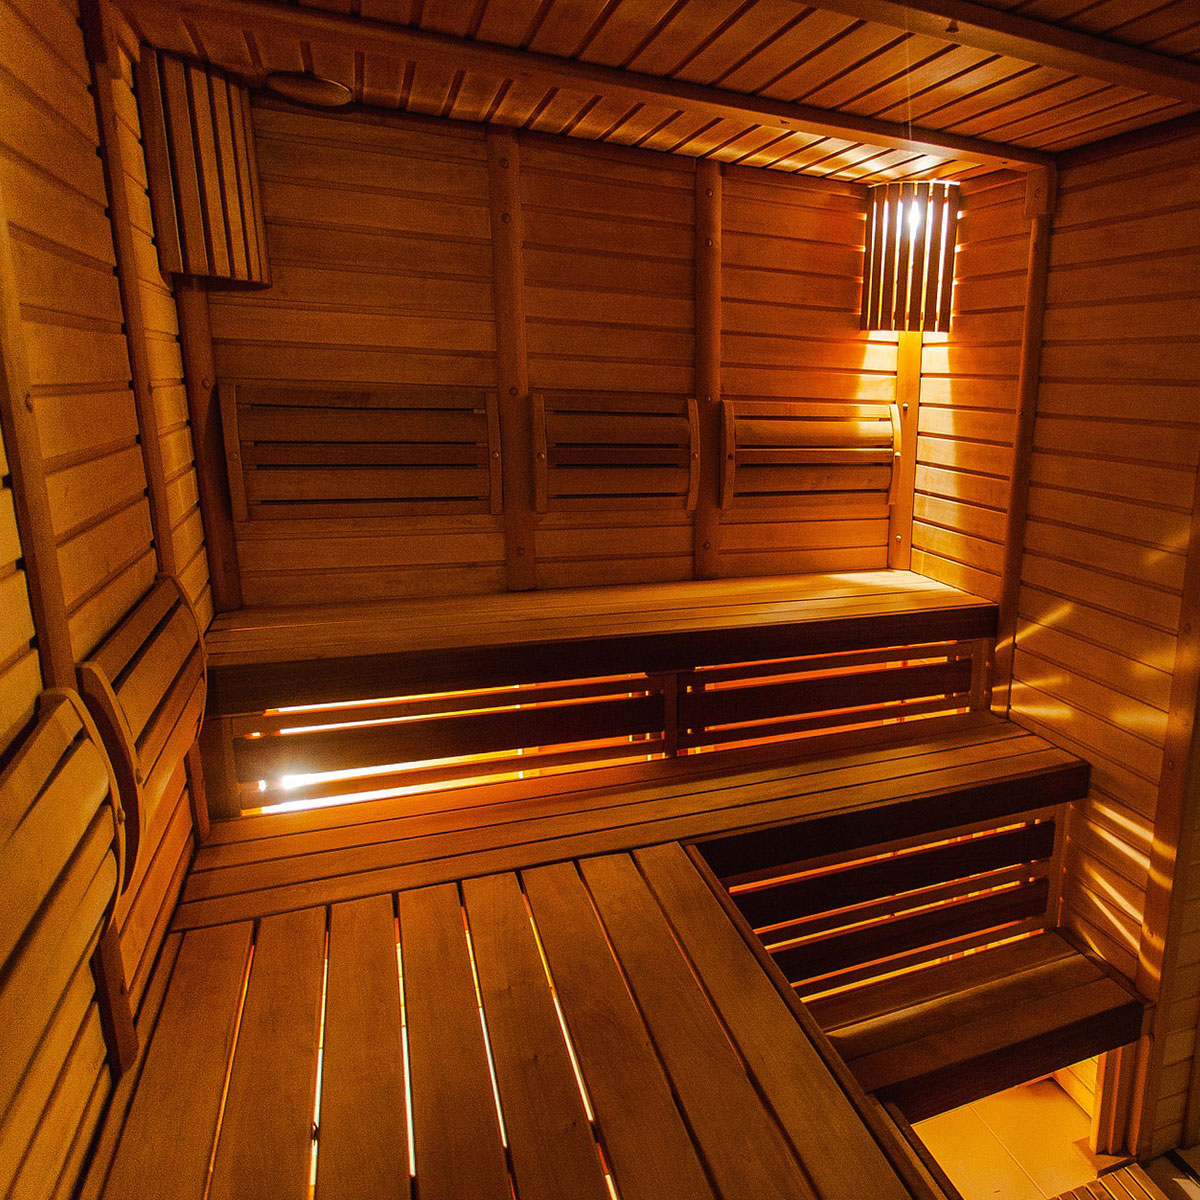 Can You Use Wood In A Sauna The Risks And Benefits